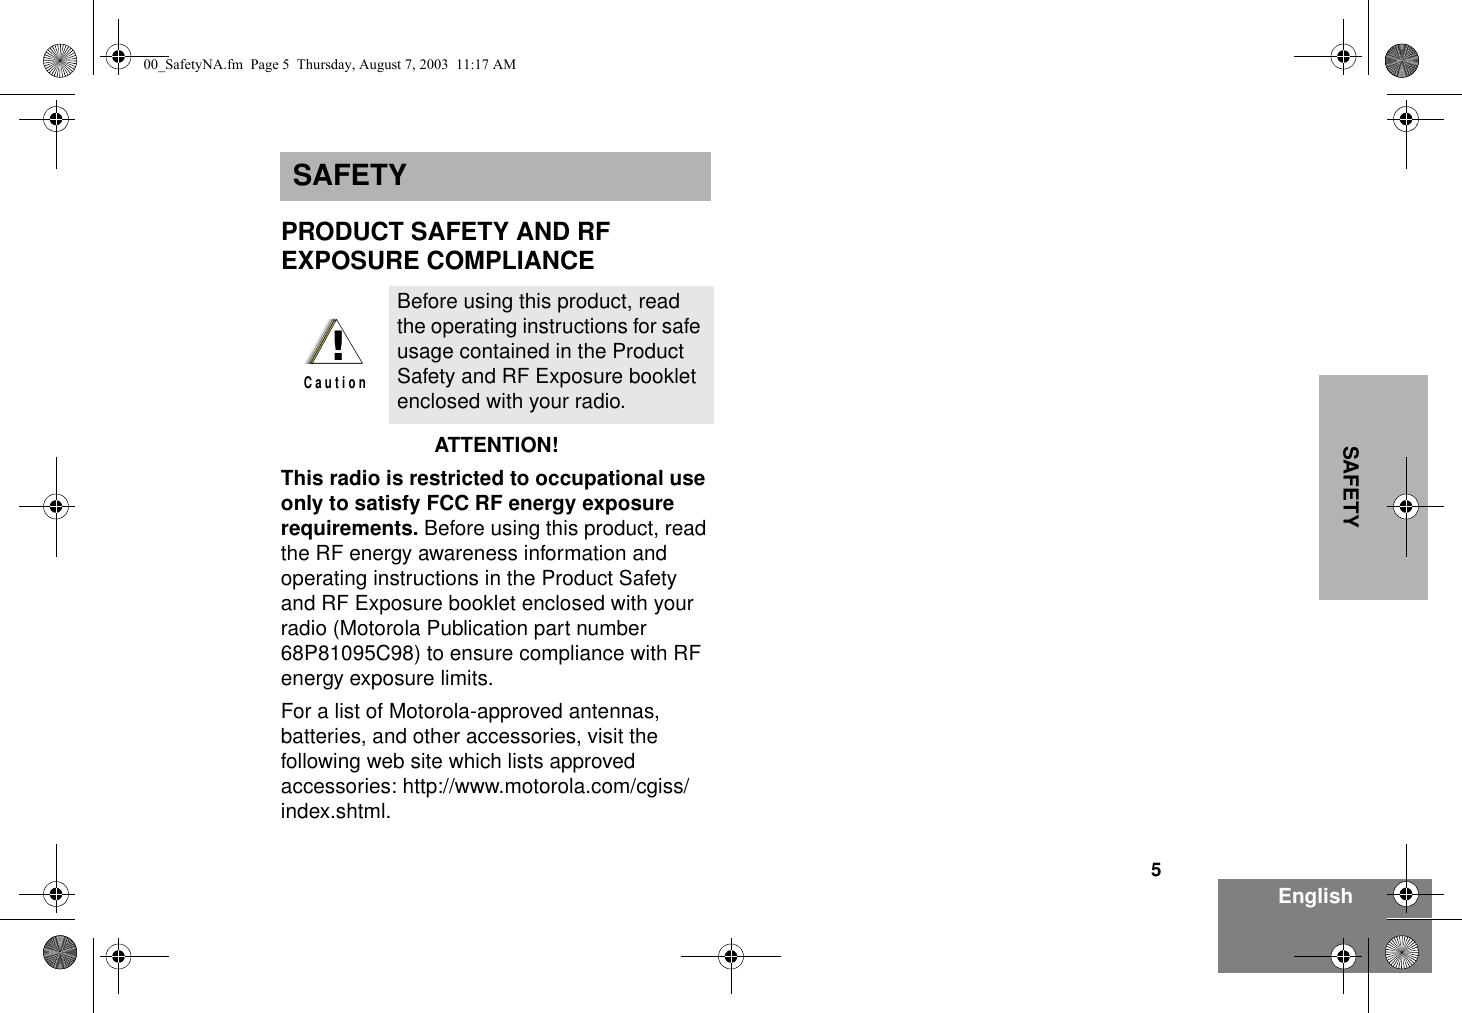 5EnglishSAFETYSAFETYPRODUCT SAFETY AND RF EXPOSURE COMPLIANCEATTENTION!  This radio is restricted to occupational use only to satisfy FCC RF energy exposure requirements. Before using this product, read the RF energy awareness information and operating instructions in the Product Safety and RF Exposure booklet enclosed with your radio (Motorola Publication part number 68P81095C98) to ensure compliance with RF energy exposure limits.  For a list of Motorola-approved antennas, batteries, and other accessories, visit the following web site which lists approved accessories: http://www.motorola.com/cgiss/index.shtml.Before using this product, read the operating instructions for safe usage contained in the Product Safety and RF Exposure booklet enclosed with your radio.!C a u t i o n00_SafetyNA.fm  Page 5  Thursday, August 7, 2003  11:17 AM